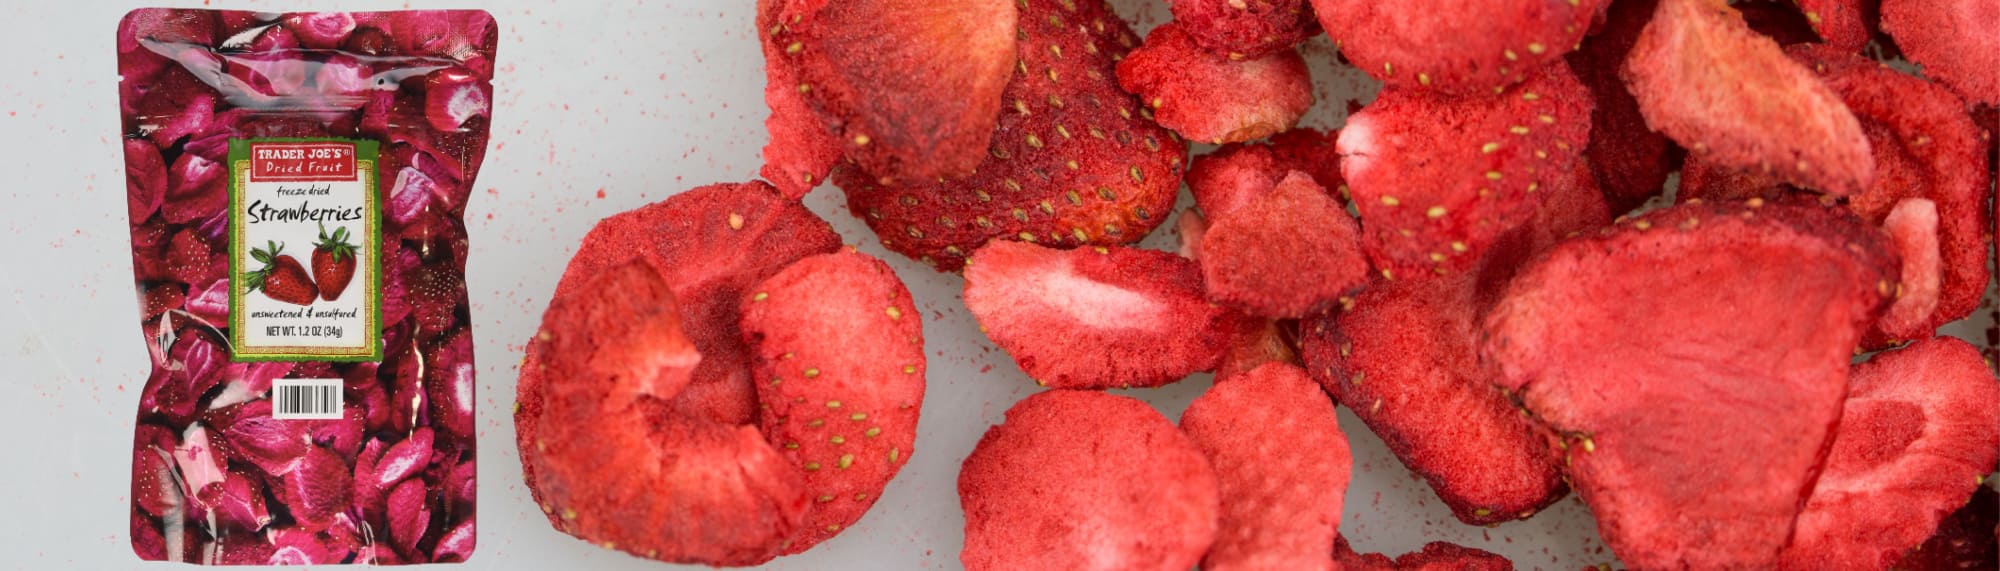 image of trader joes best freeze dried strawberries